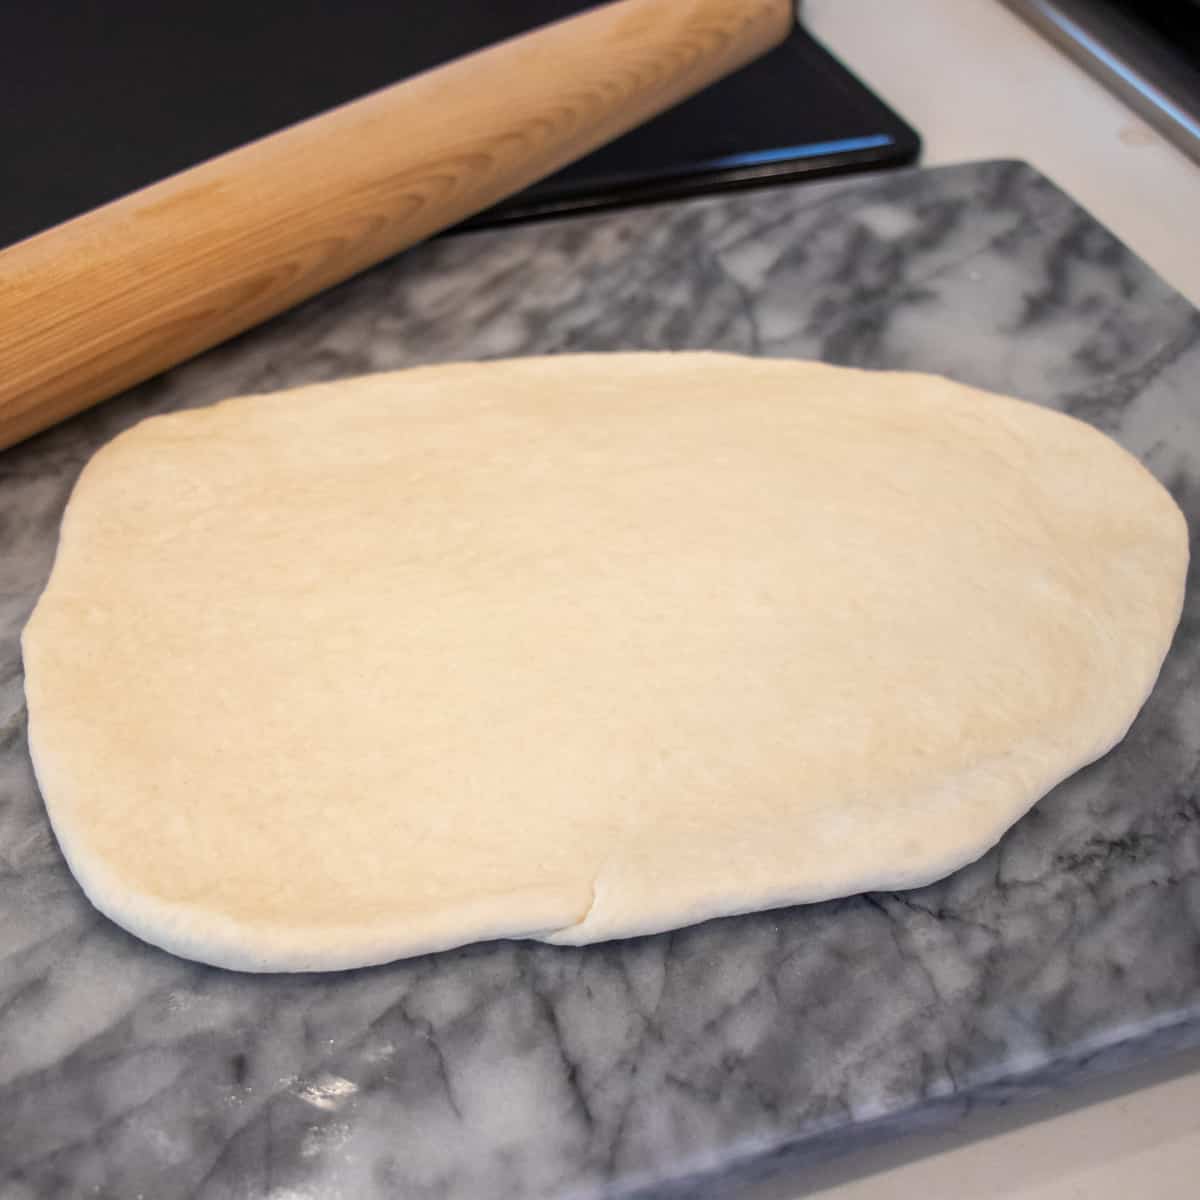 Dough rolled out flat with a rolling pin.